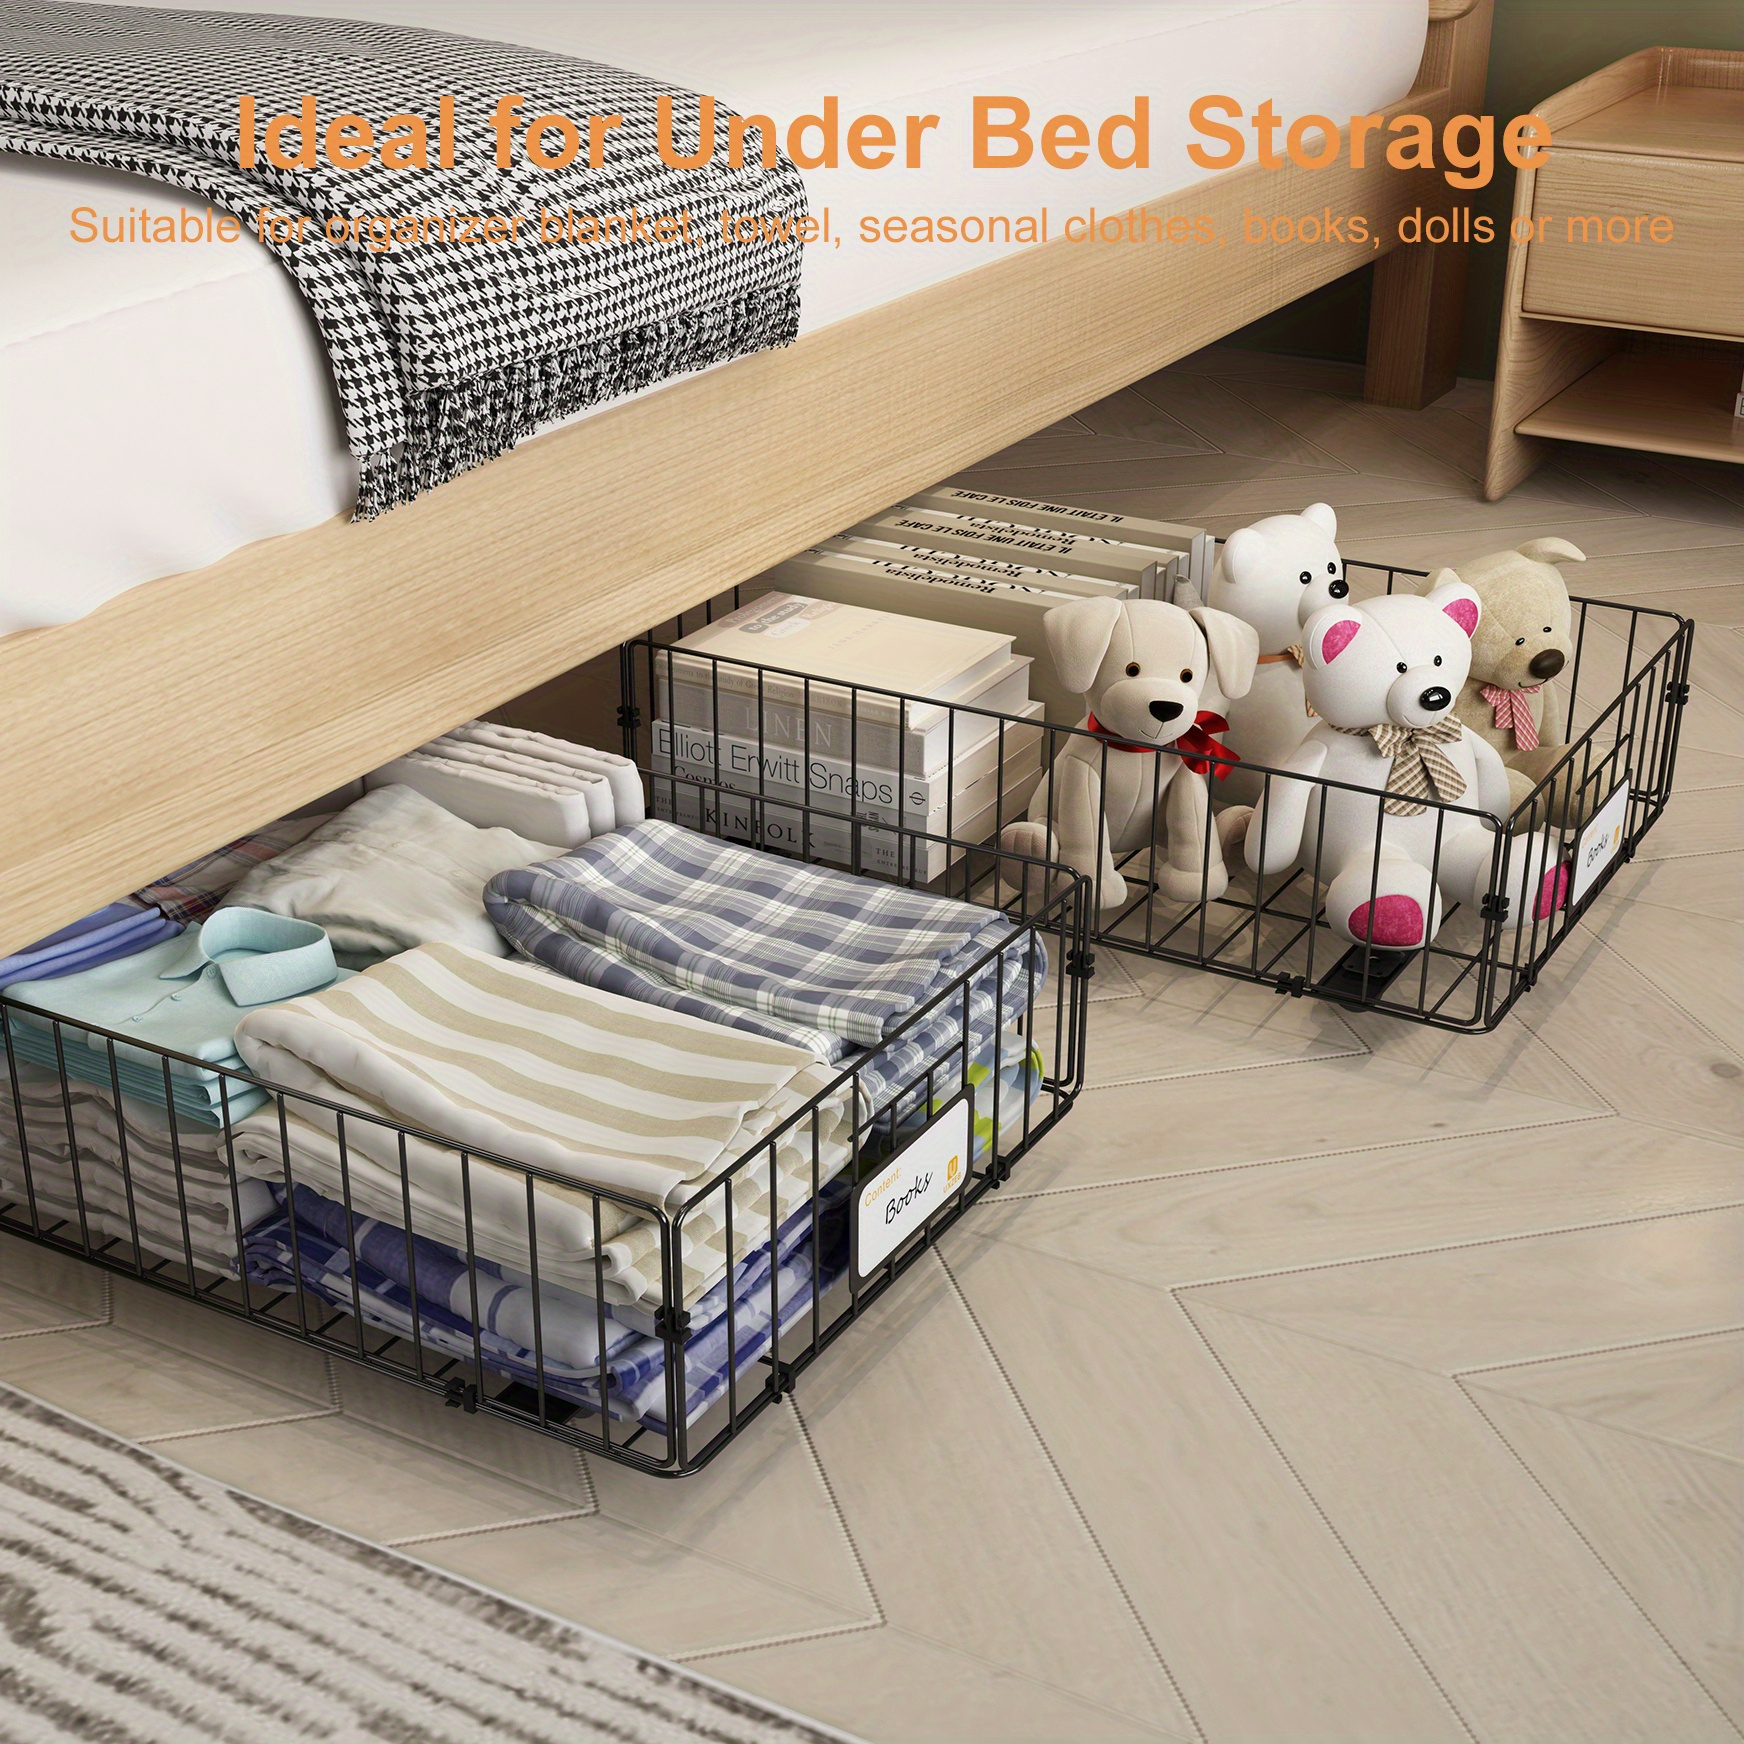 Under Couch or Bed Rolling Storage Bin 